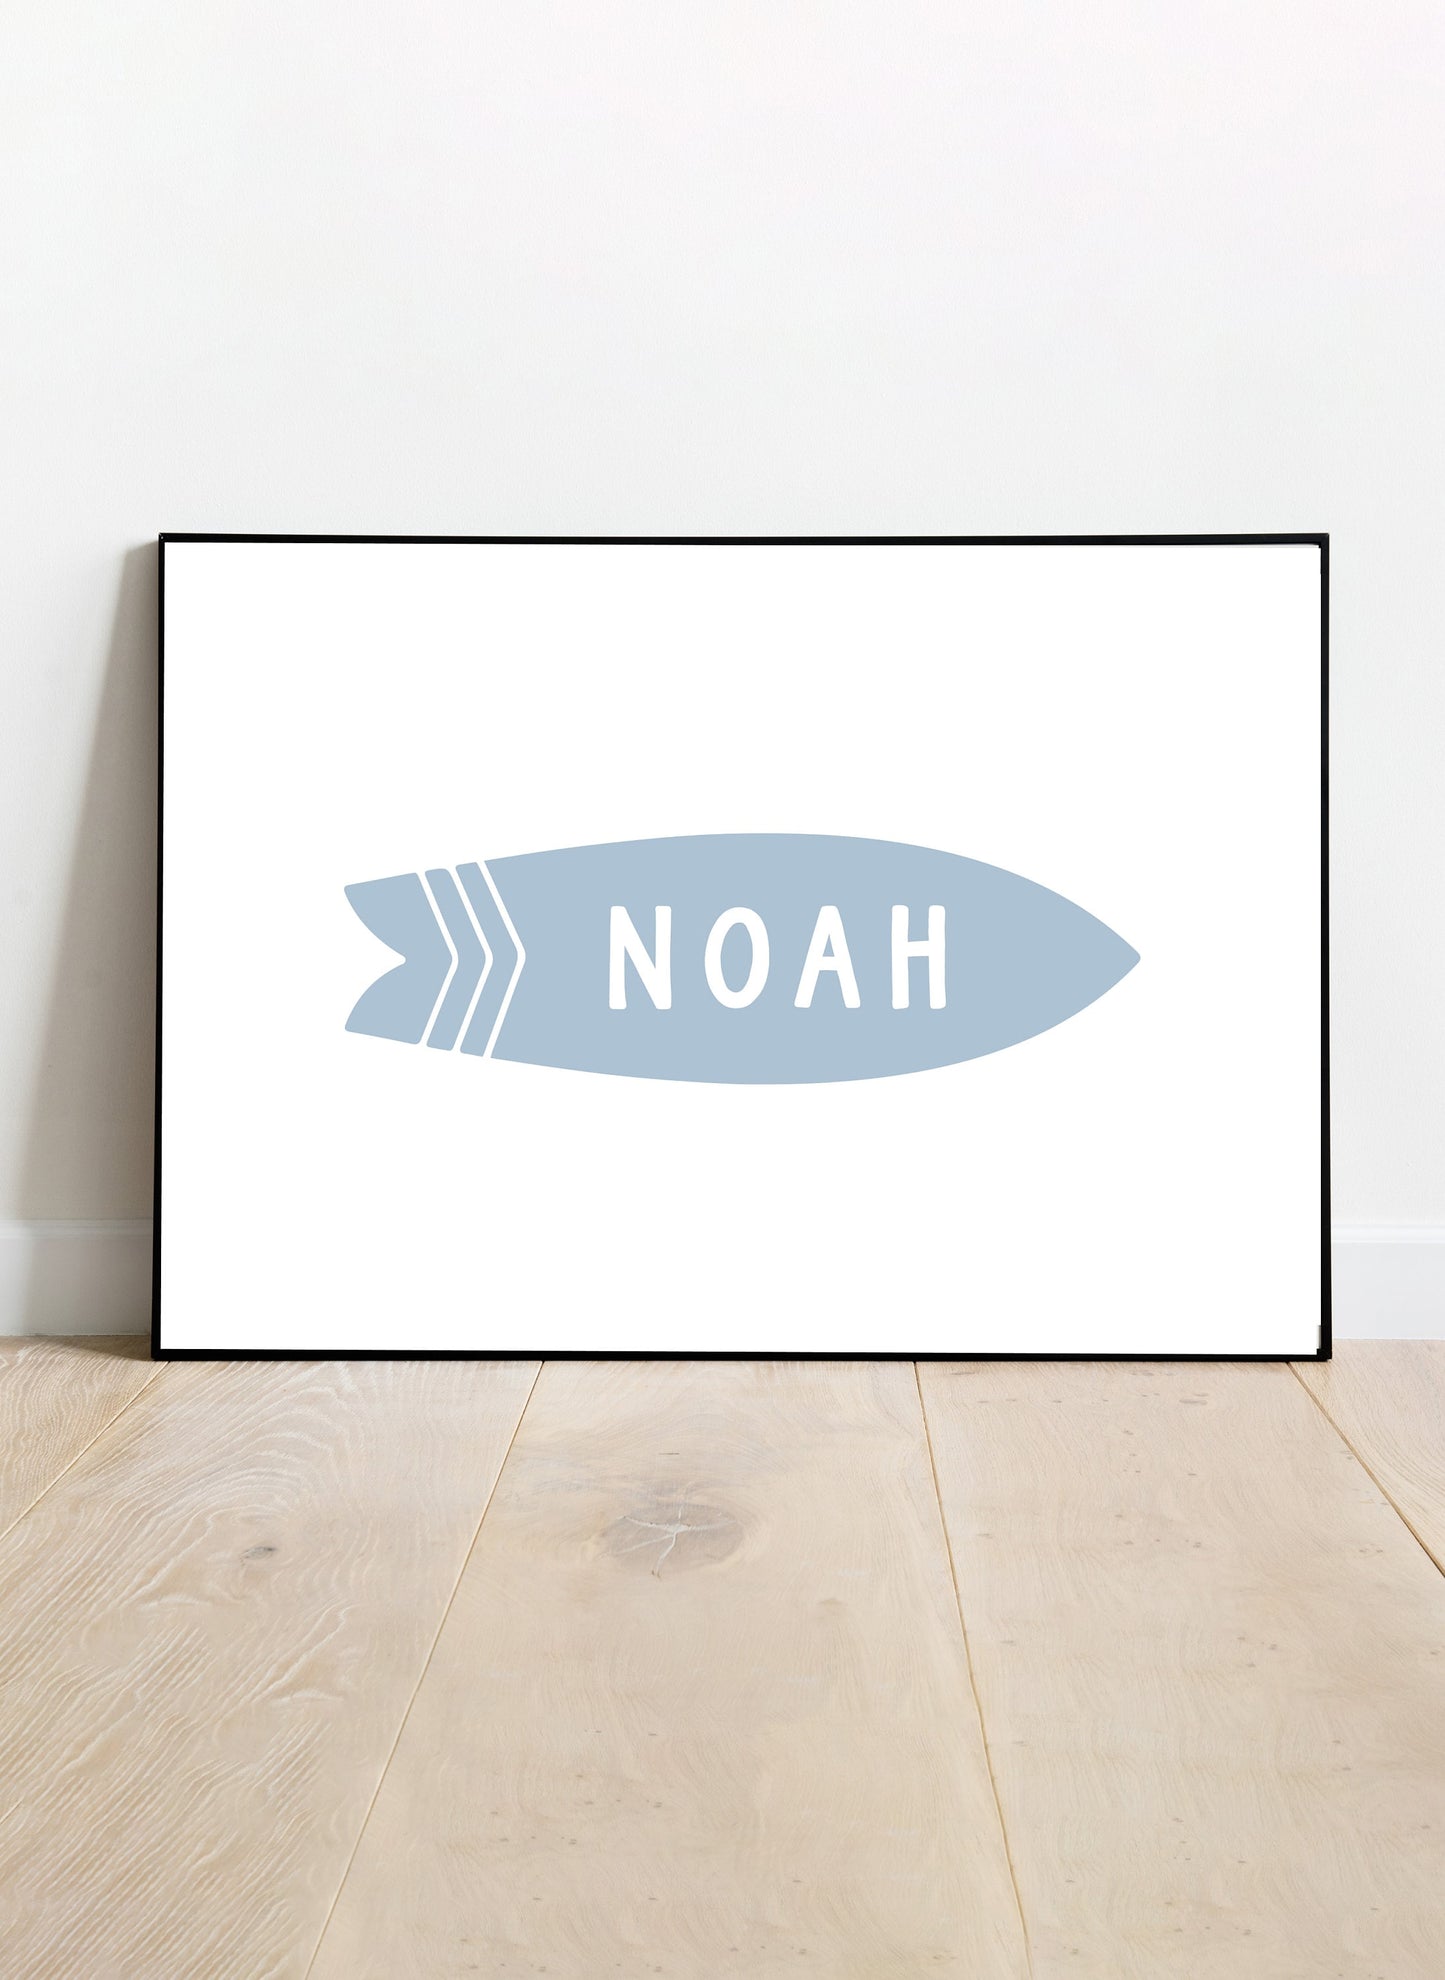 Personalized Name Surfboard Print (Blue)